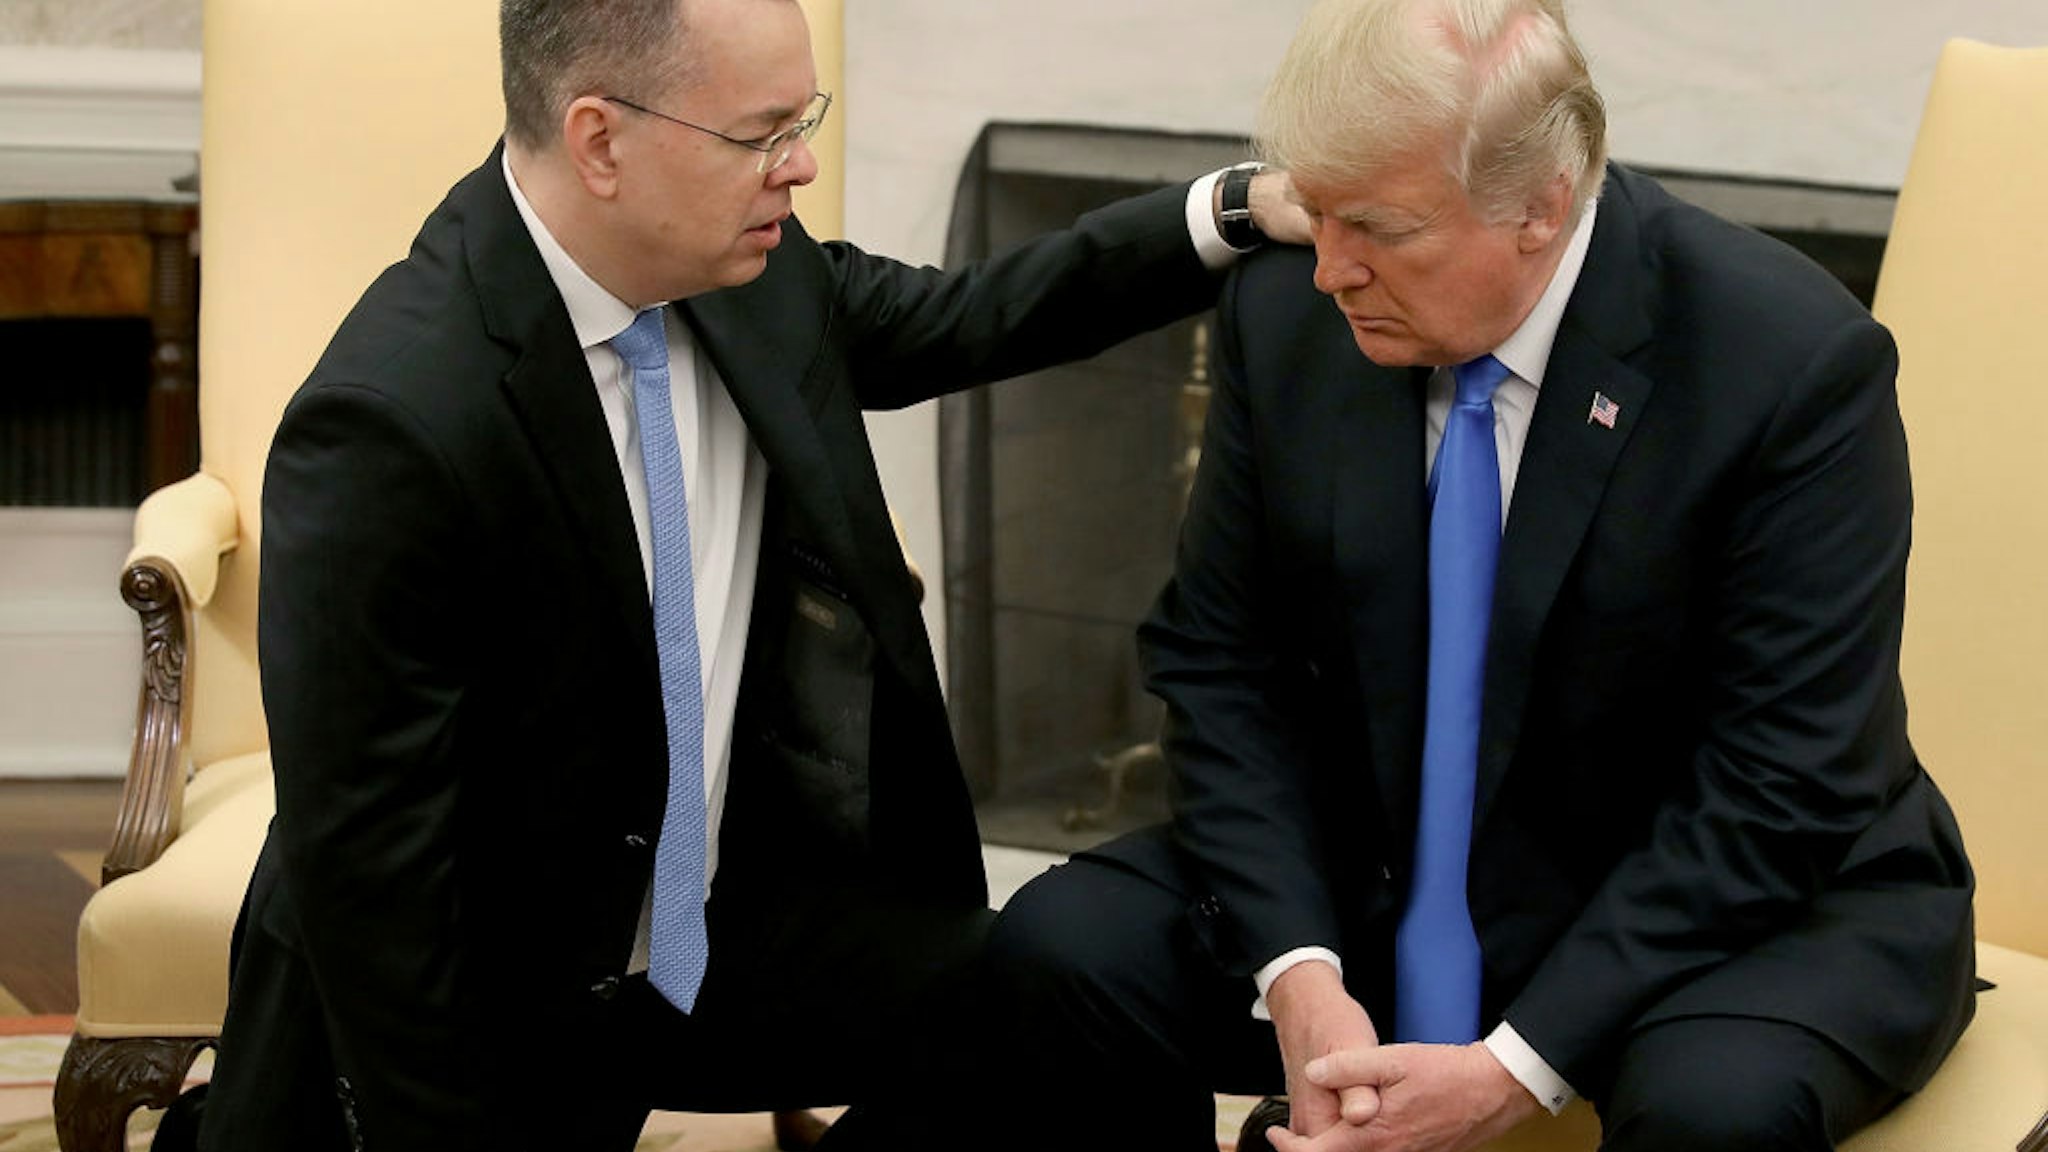 U.S. President Donald Trump and American evangelical Christian preacher Andrew Brunson (L) participate in a prayer in the Oval Office a day after Brunson was released from a Turkish jail, at the White House on October 13, 2018 in Washington, DC.